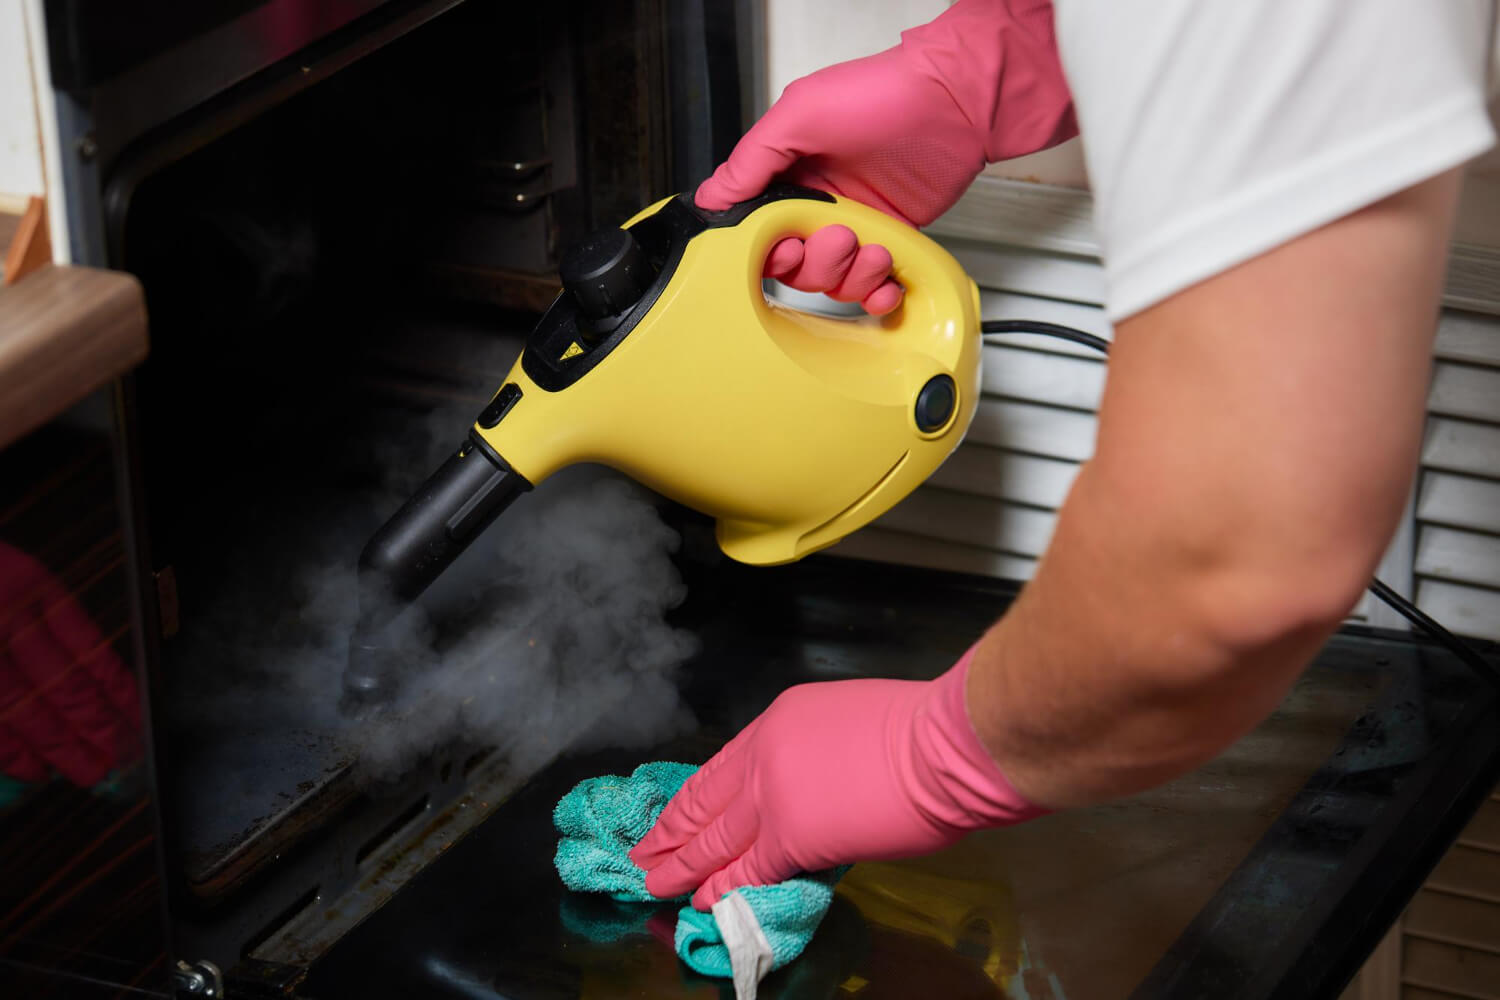 experienced cleaner with rubber gloves stemcleaning the inside of the oven